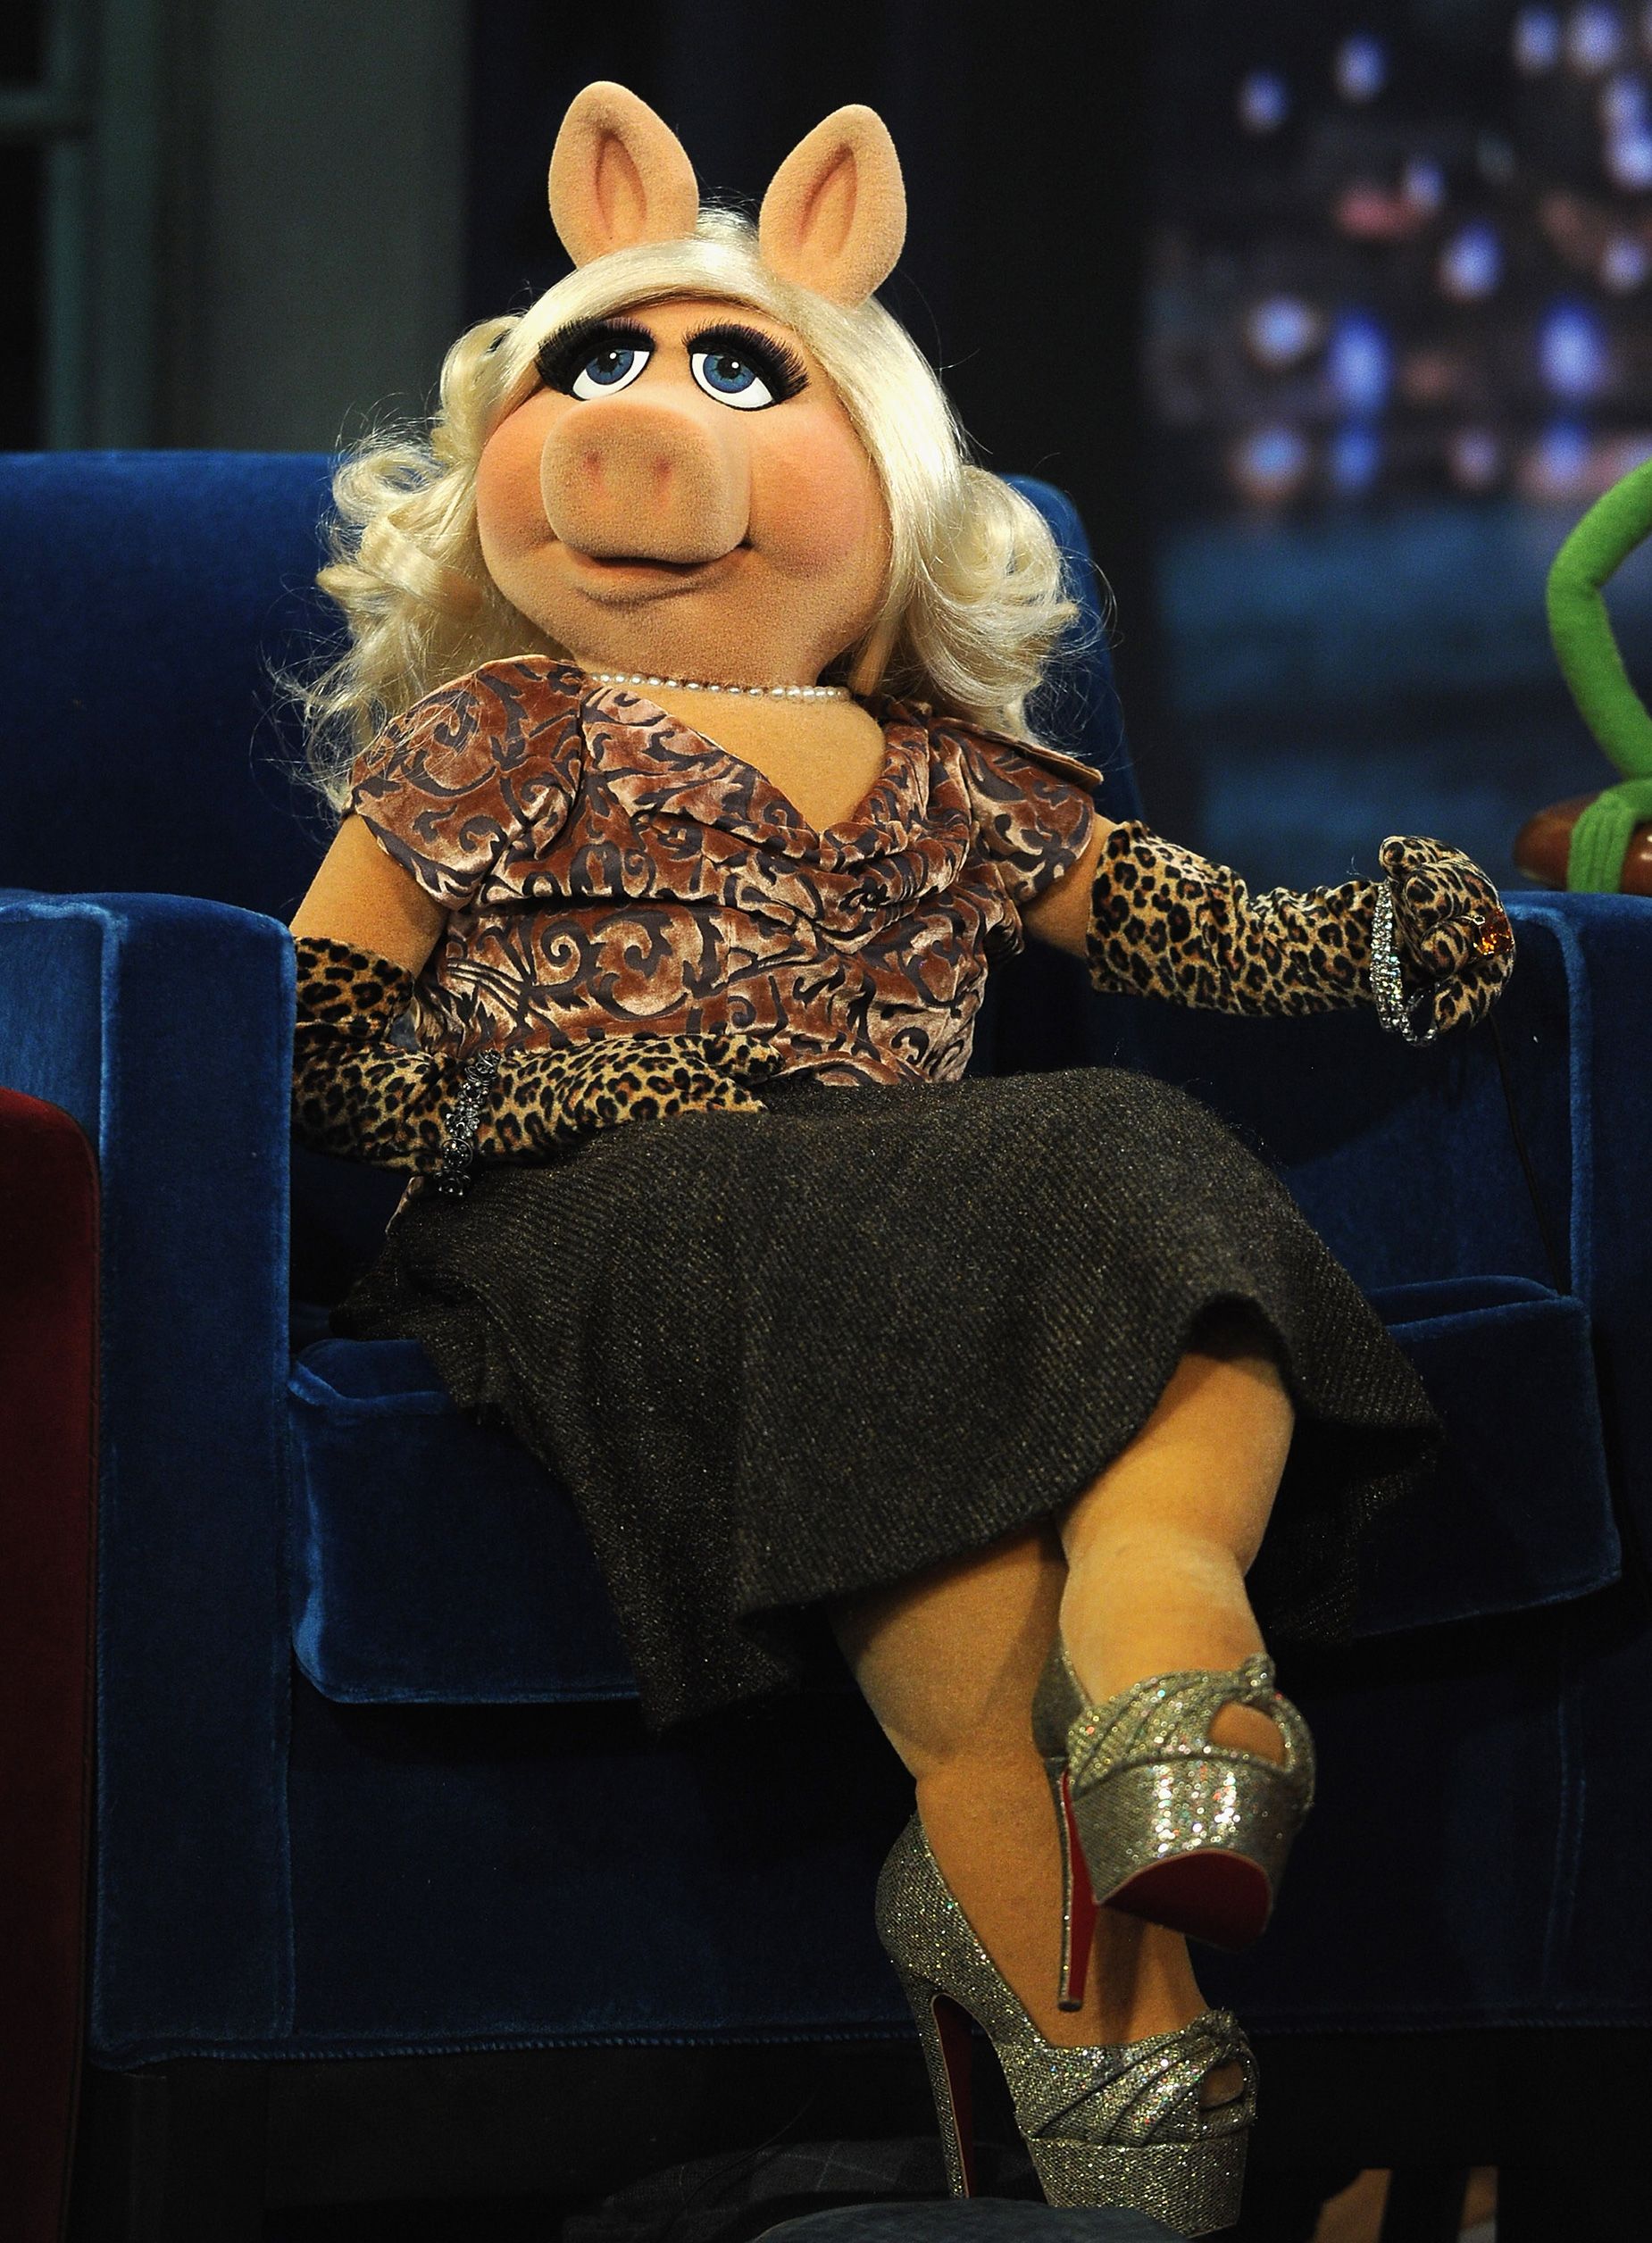 Miss Piggy in her Louboutins on the set of 